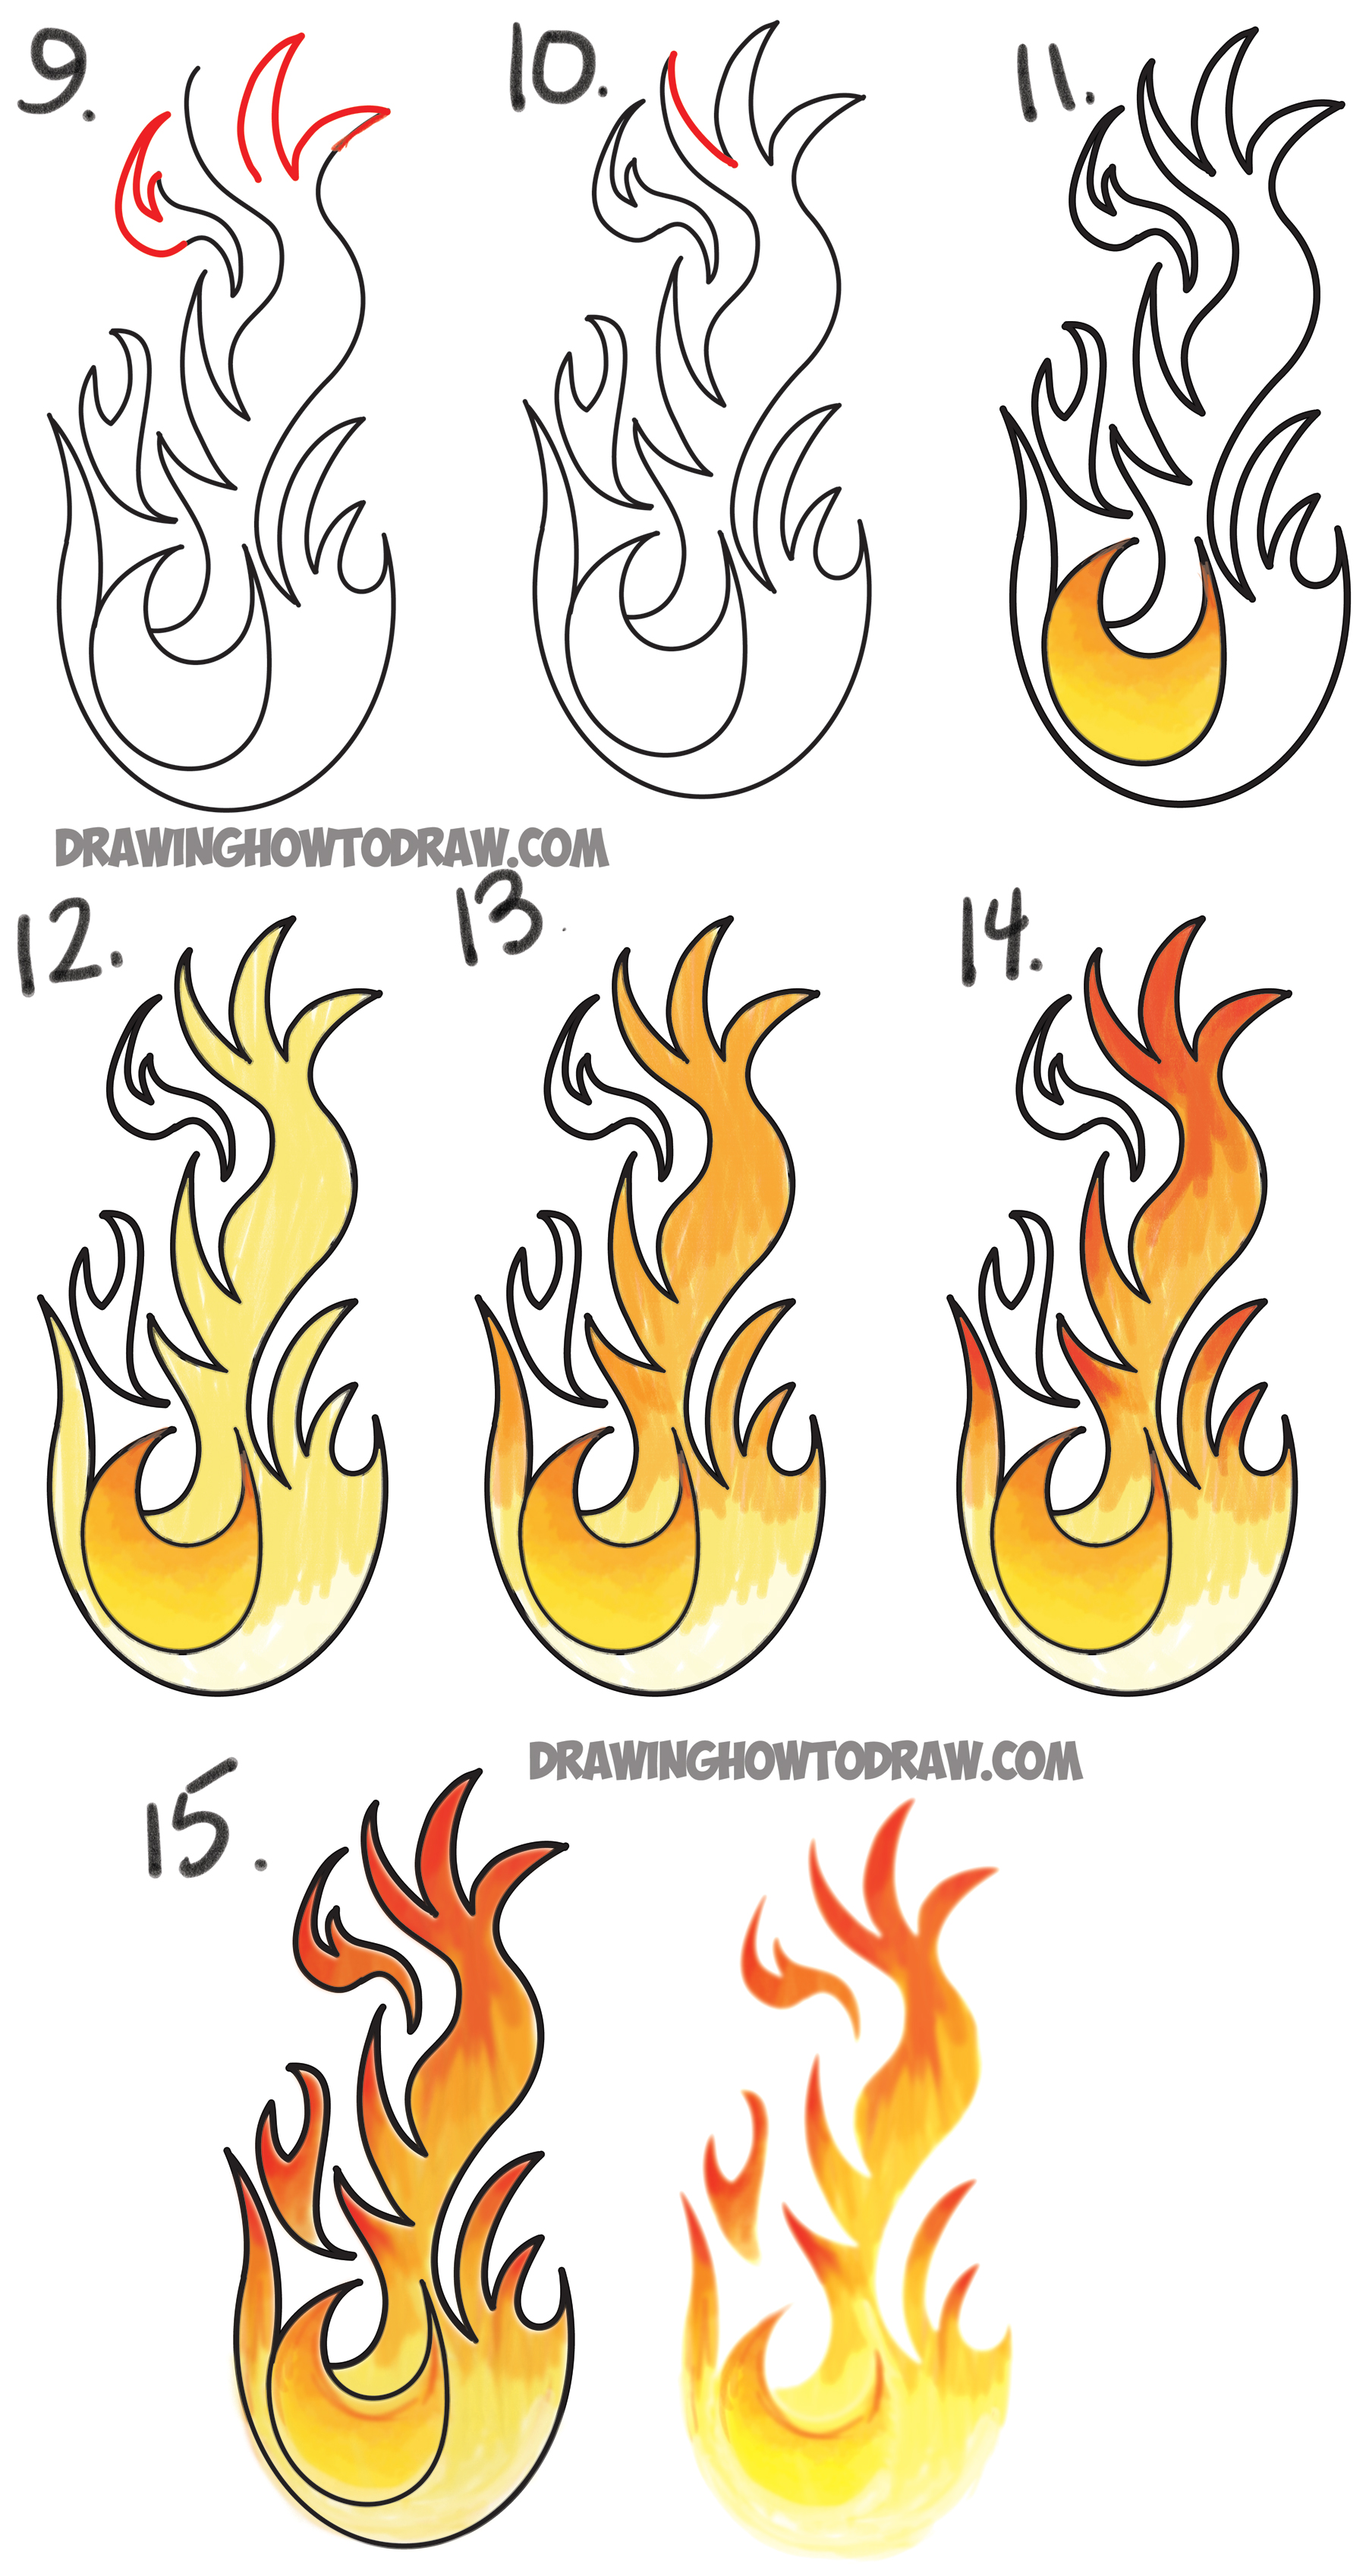 How to Draw Flames and Drawing Cartoon Fire Drawing Tutorial - How to